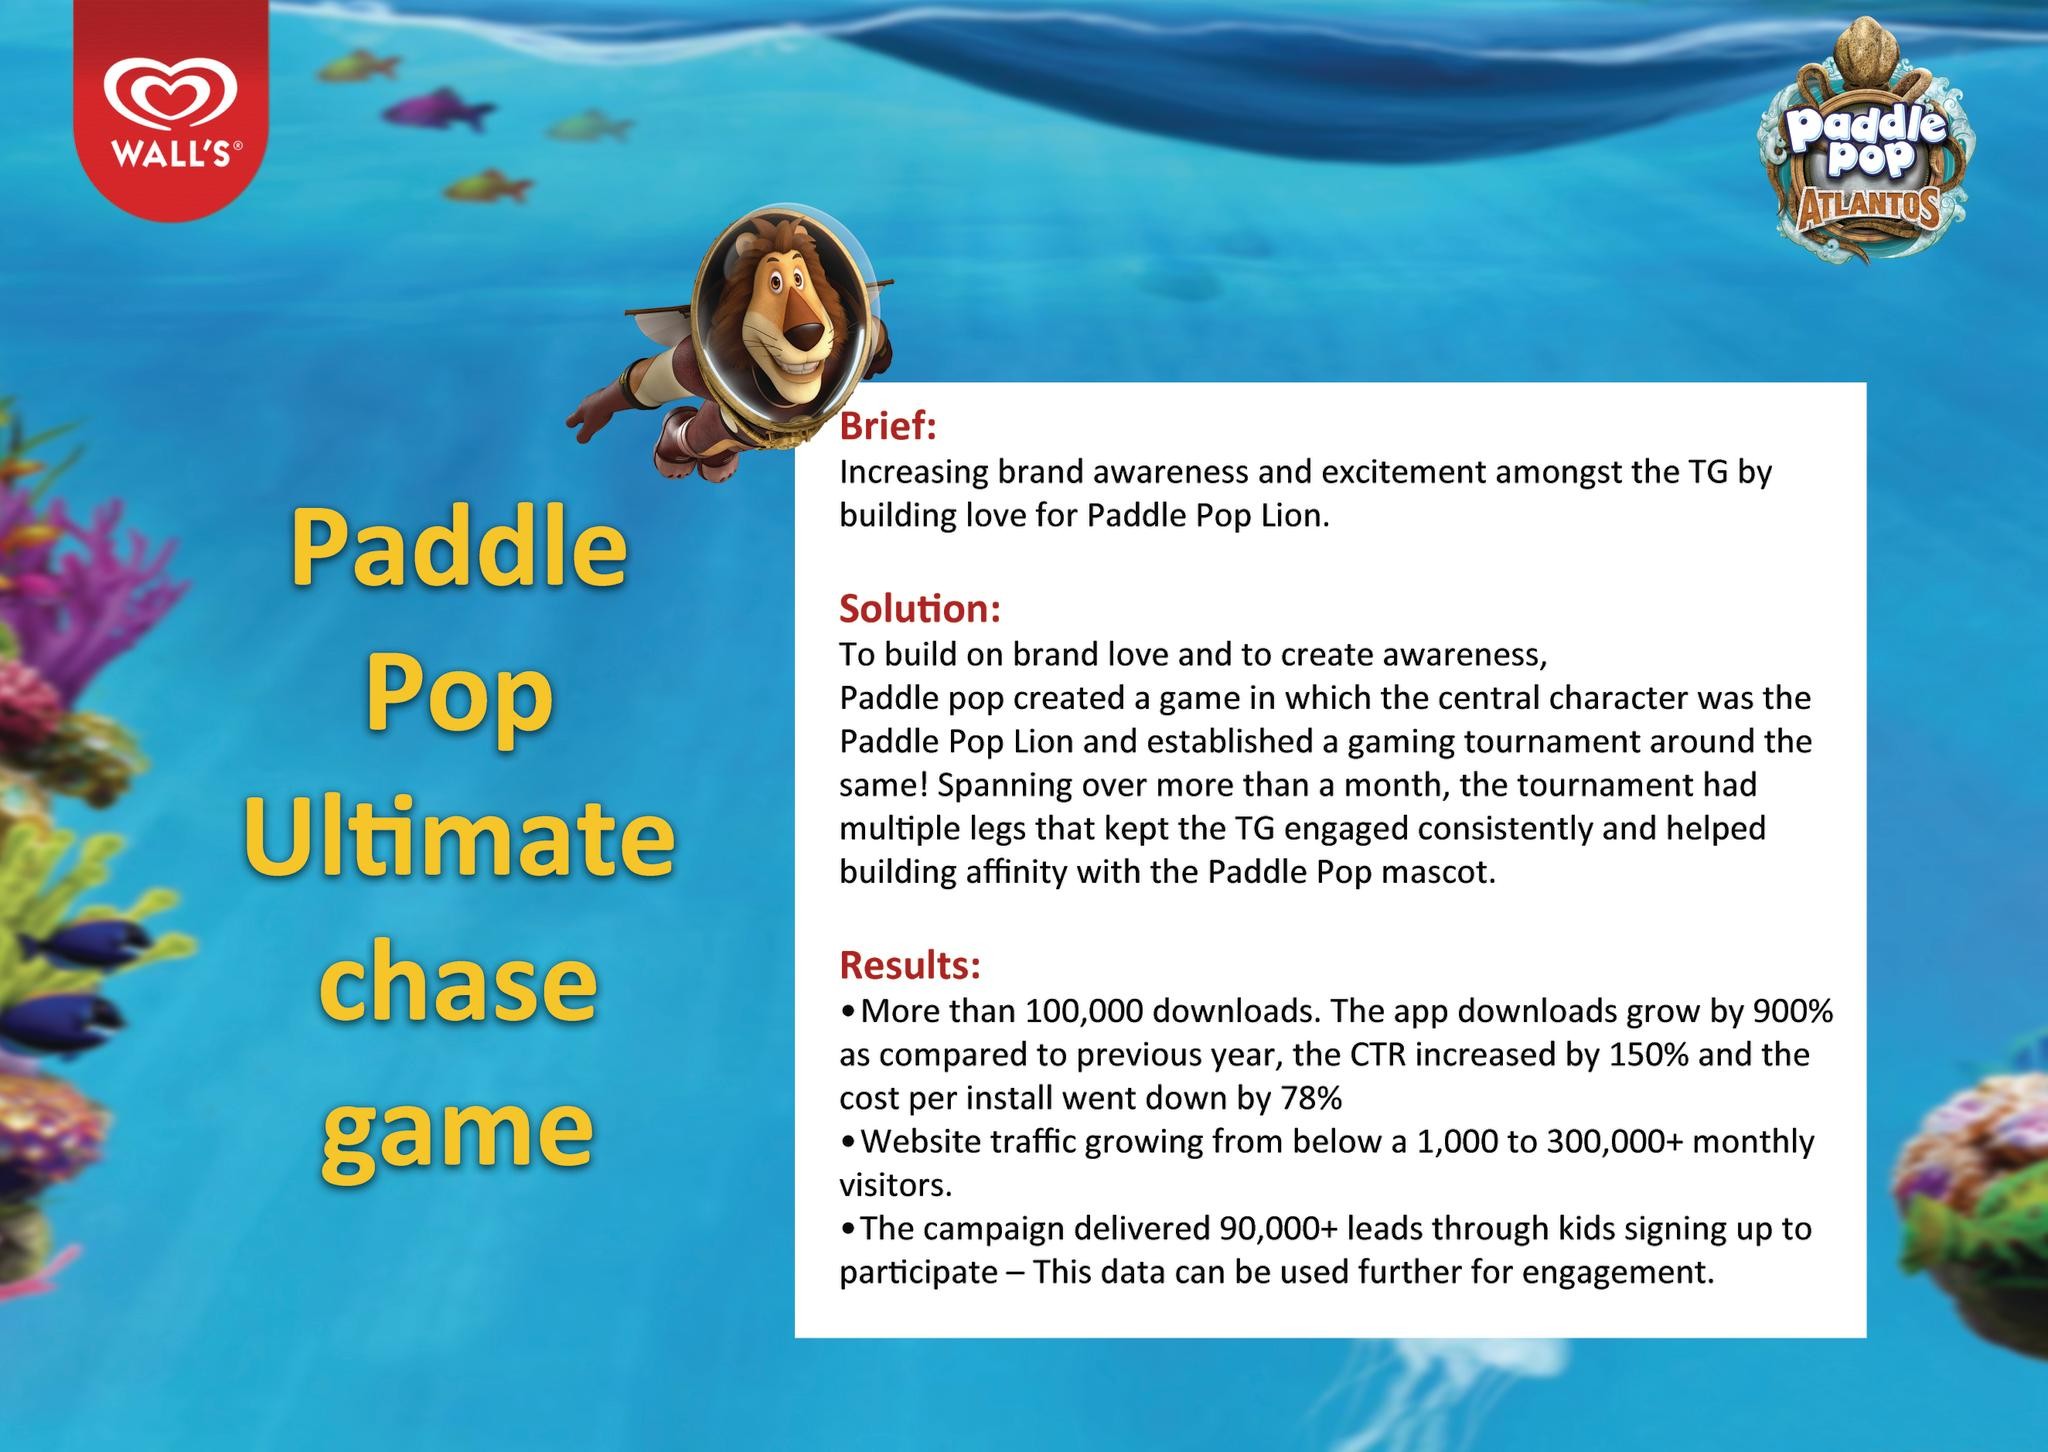 Paddle Pop Ultimate Chase